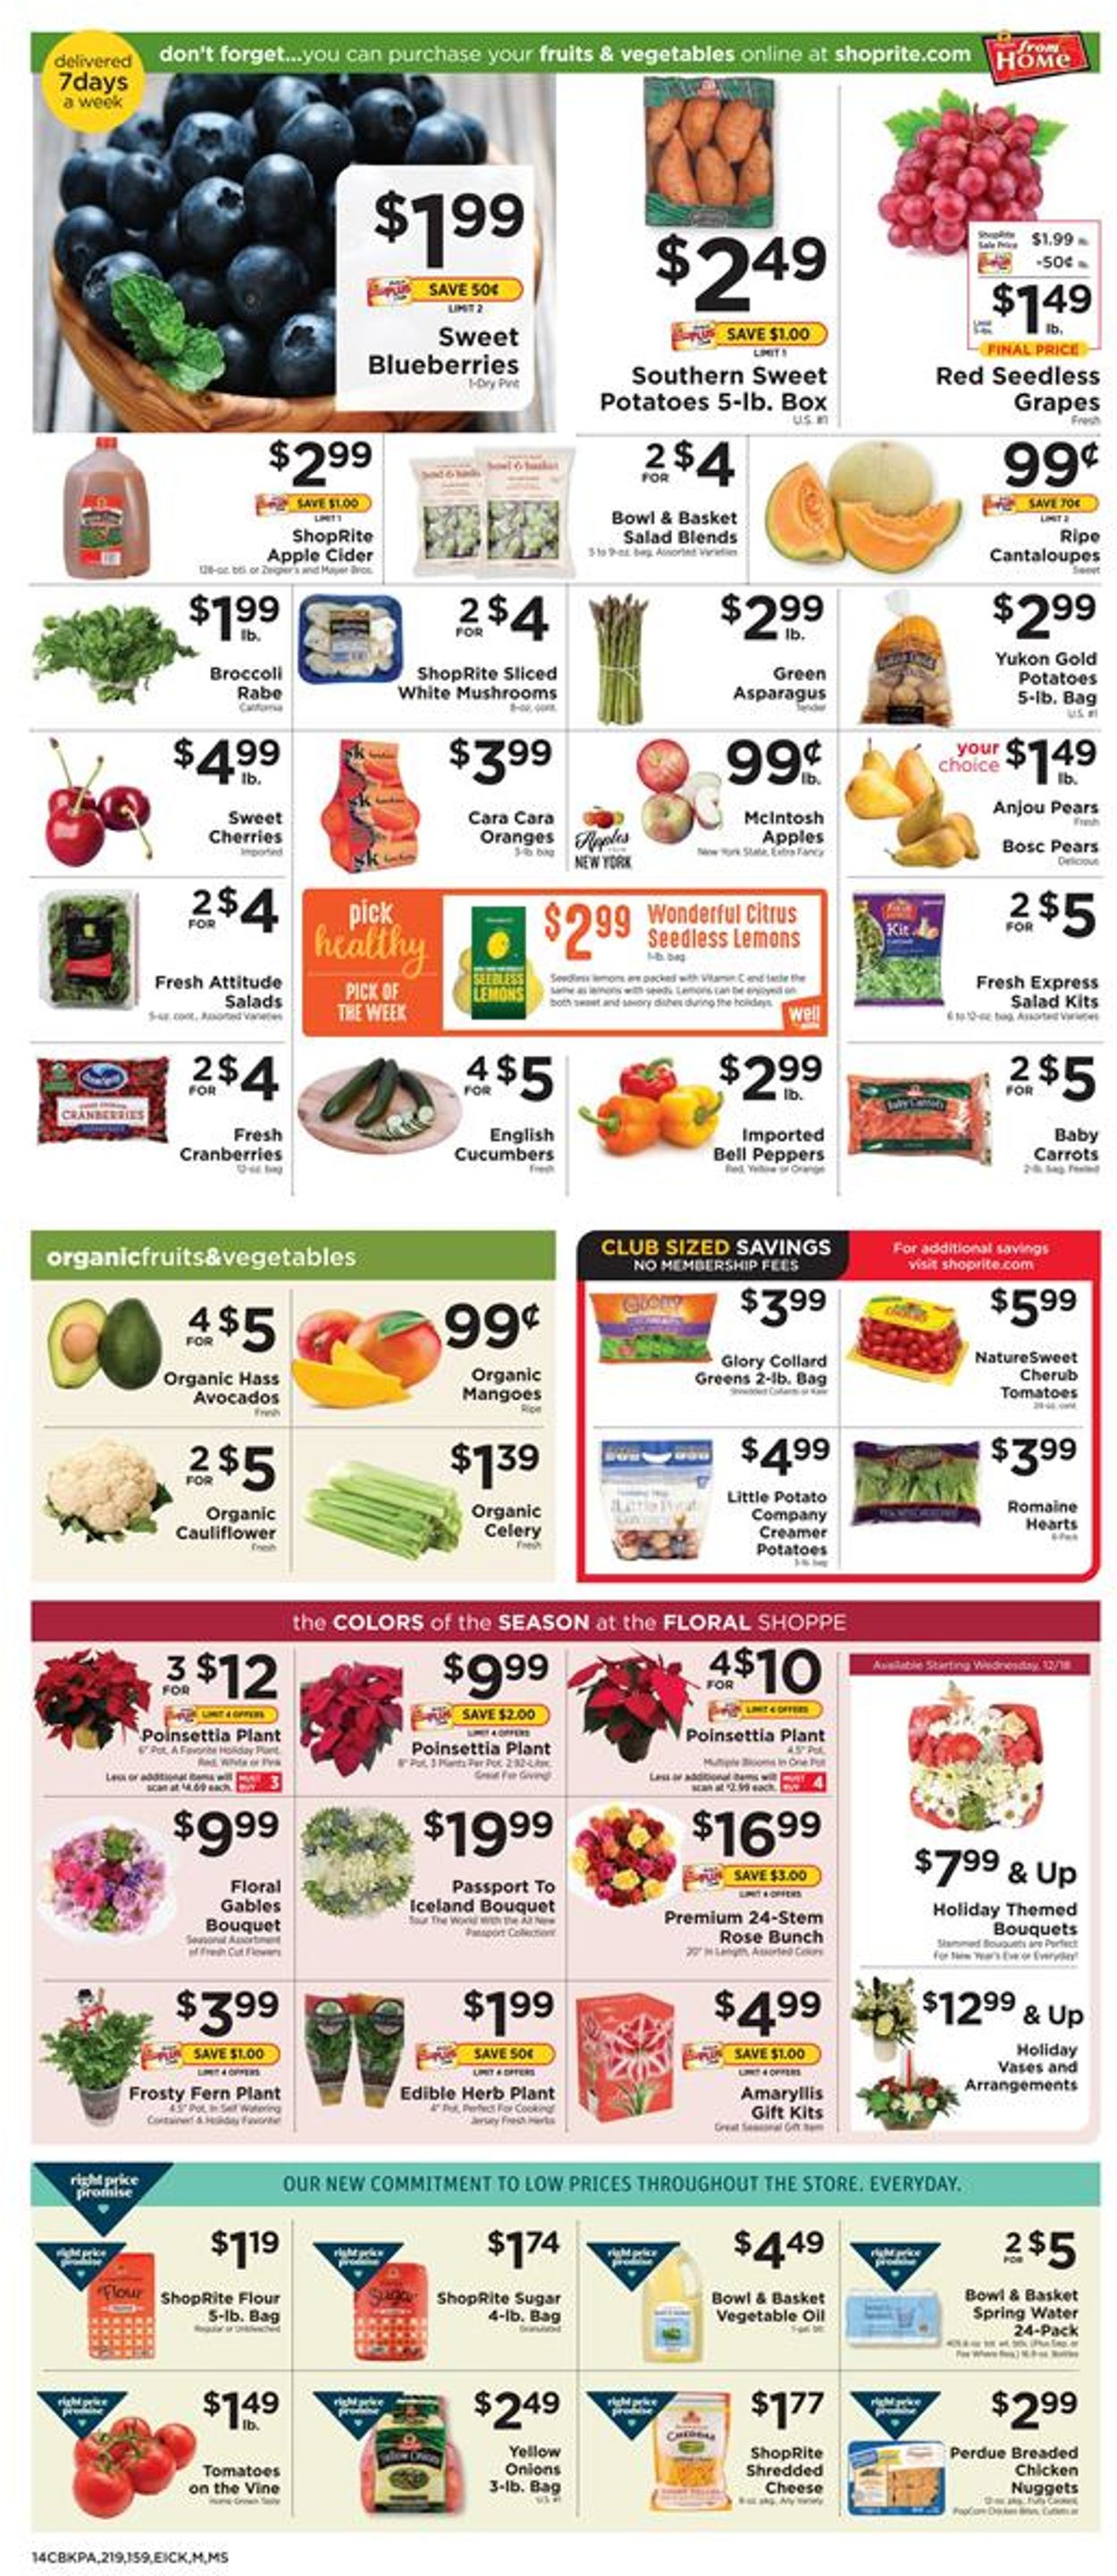 Catalogue ShopRite - Holiday Ad 2019 from 12/15/2019